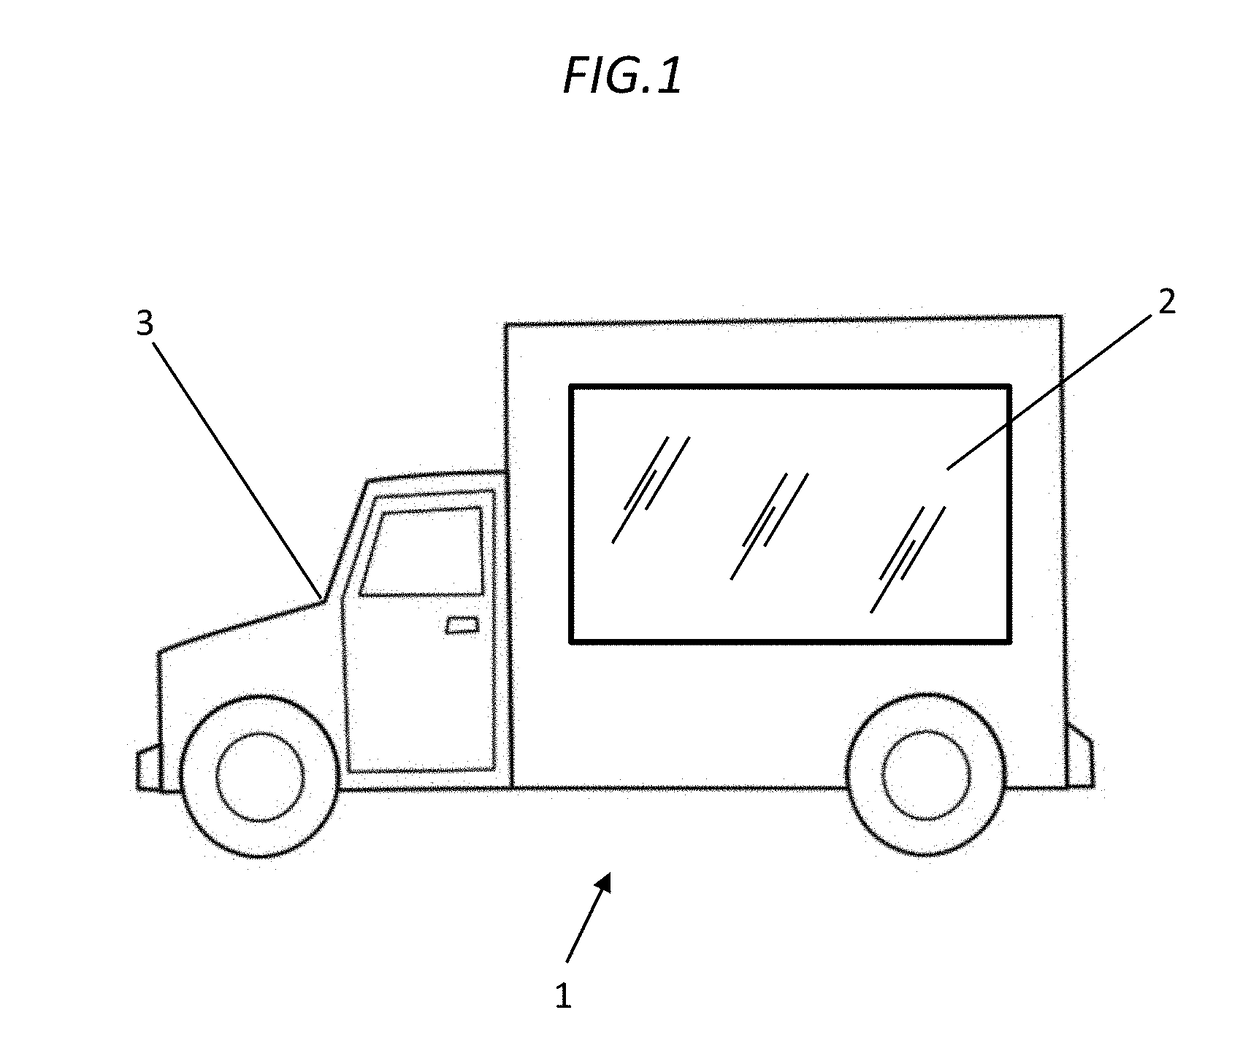 Intelligent Sensor System for Capturing Advertising Impressions from Autonomous Self-Driving Vehicles with Advertising Platforms